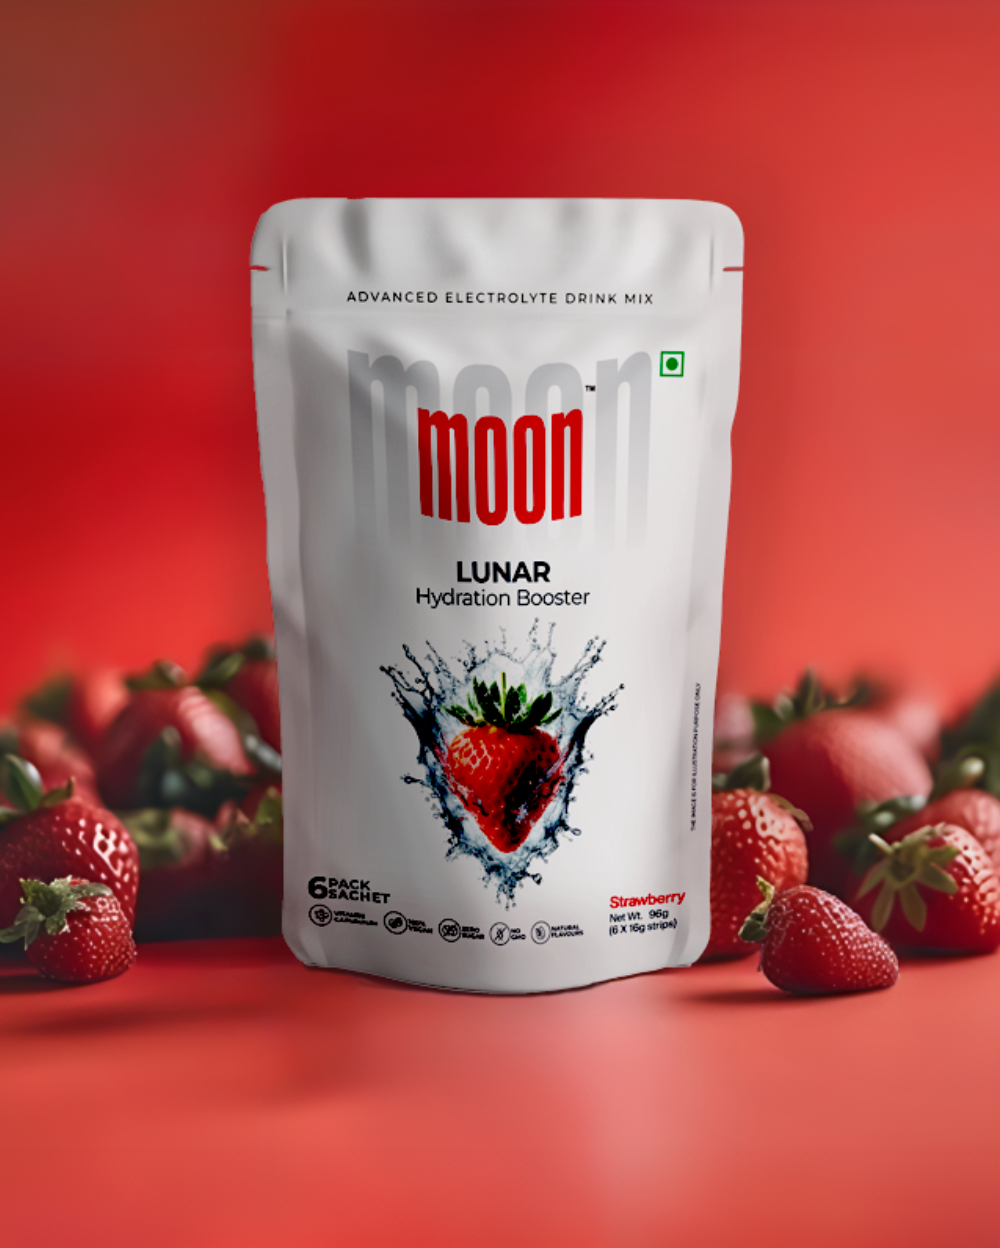 A white pouch labeled "Lunar Hydration Booster - Strawberry" by MOONFREEZE FOODS PRIVATE LIMITED, featuring a strawberry illustration and splashing water, is displayed against a red background with fresh strawberries in view. The design highlights its essential electrolytes, vitamins, and minerals for optimal hydration.